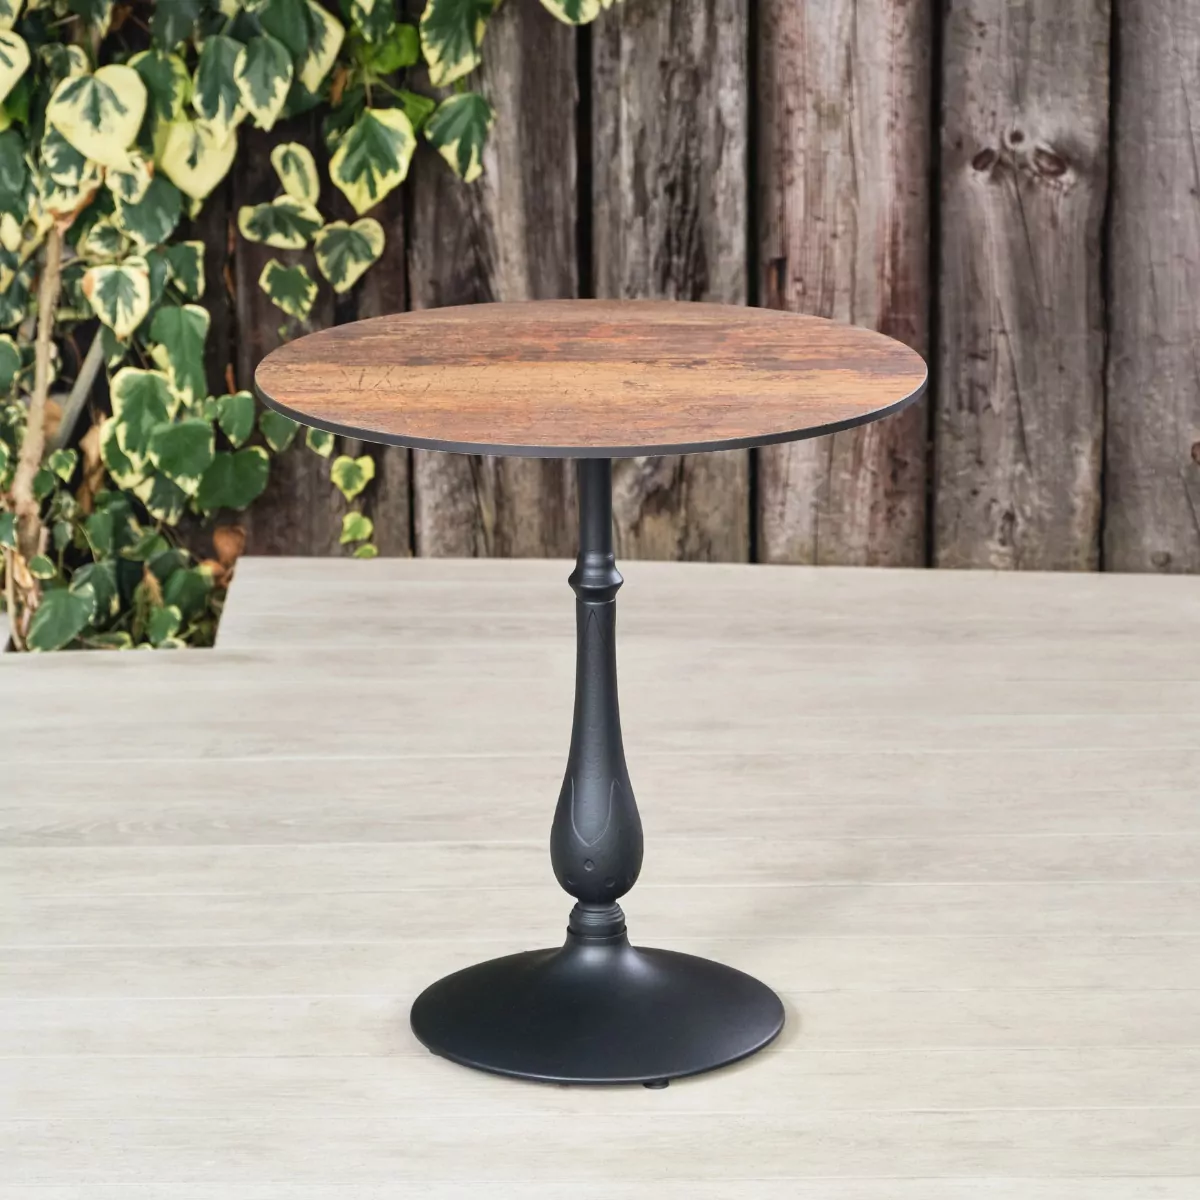 Bronze Rockingham Round Pedestal Table with Round Base. Suitable for Indoor & Outdoor Use.